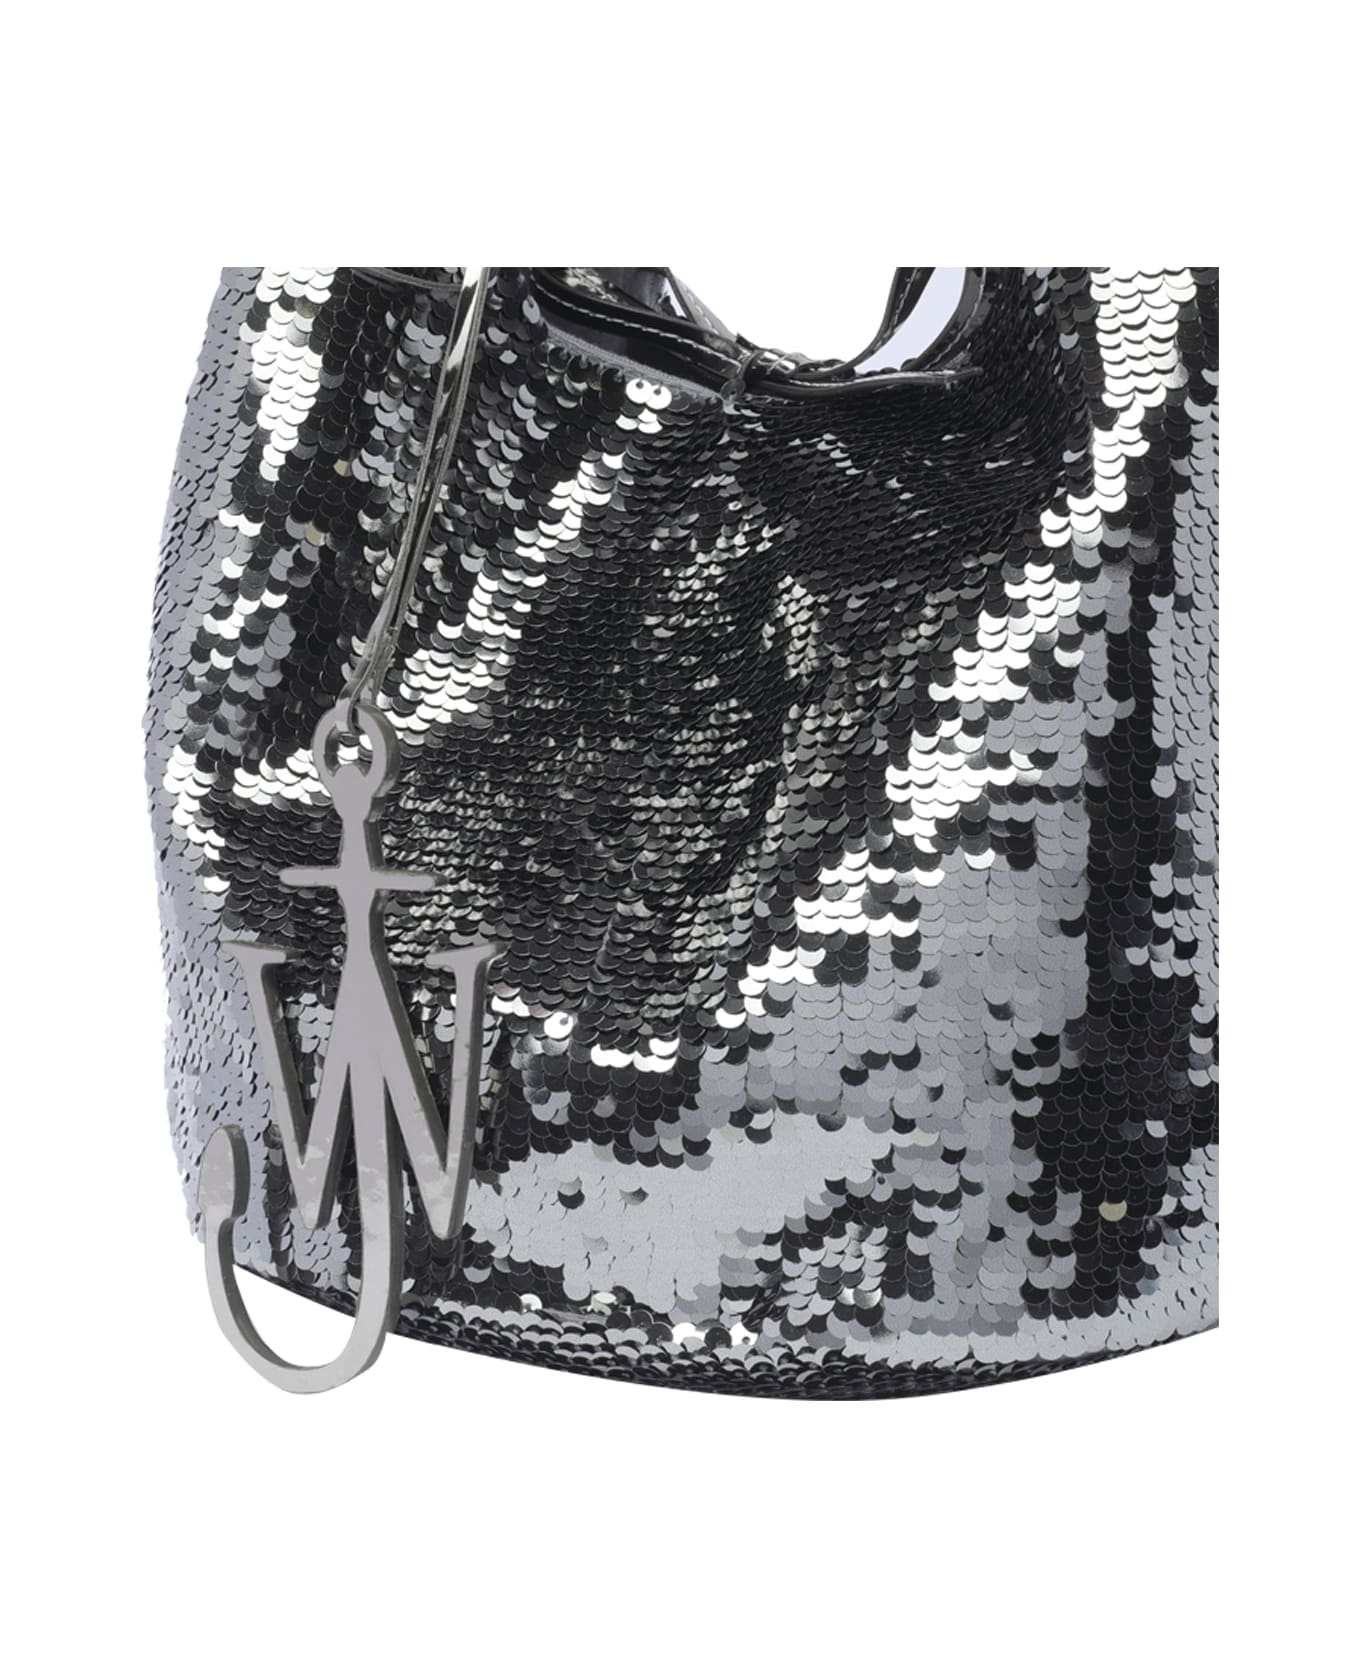 J.W. Anderson Mini Sequins Shopping Bag - Charcoal トートバッグ